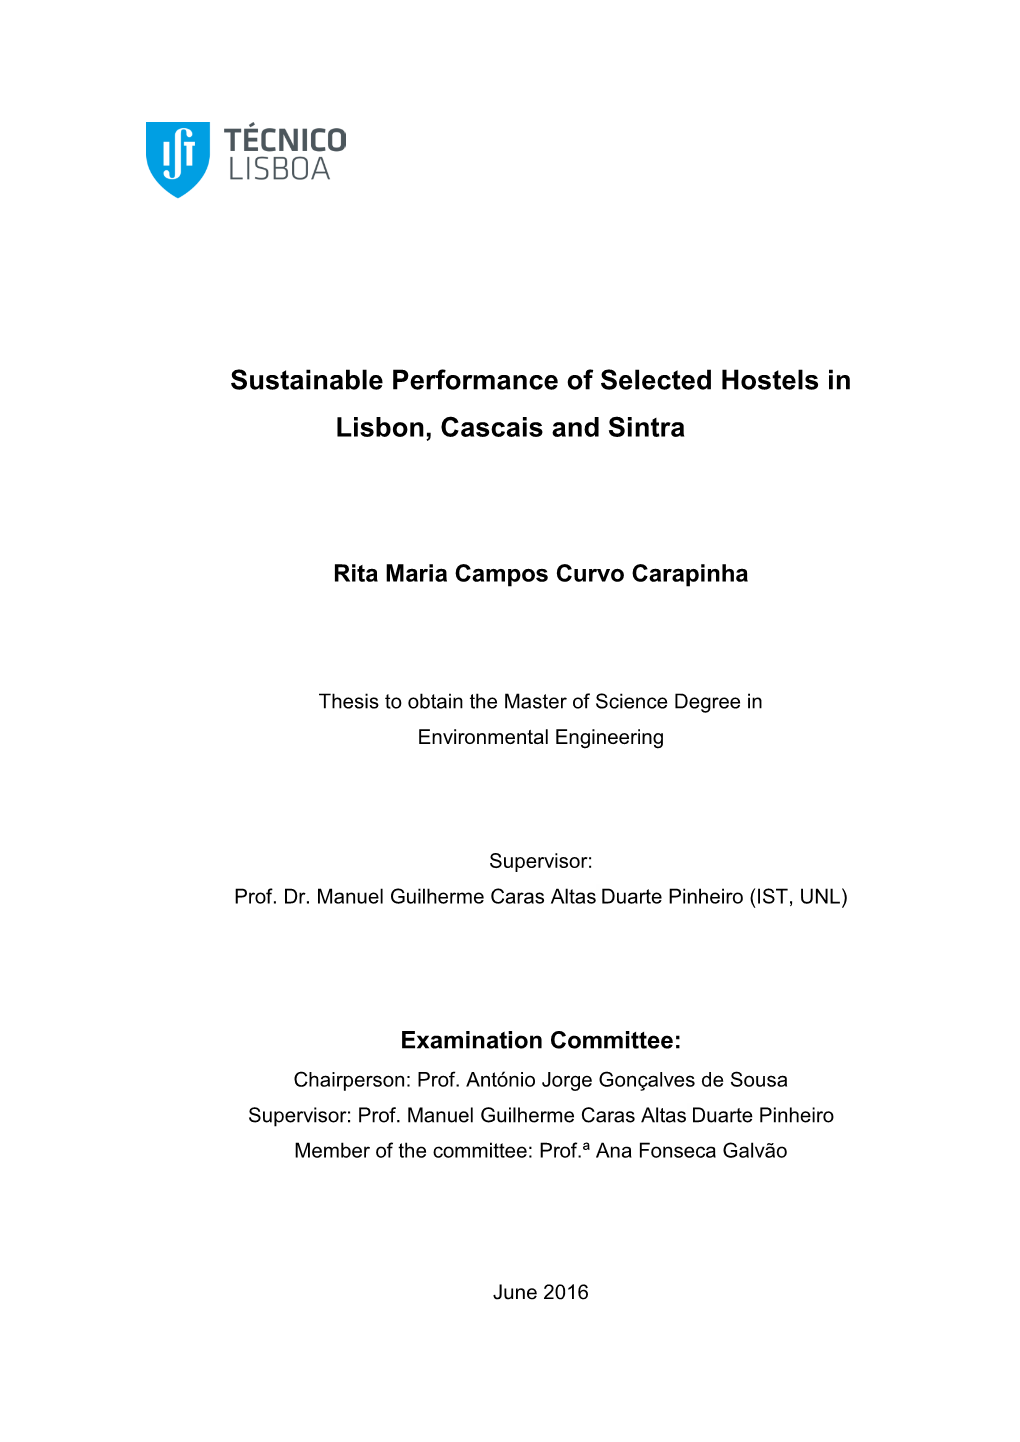 Sustainable Performance of Selected Hostels in Lisbon, Cascais and Sintra